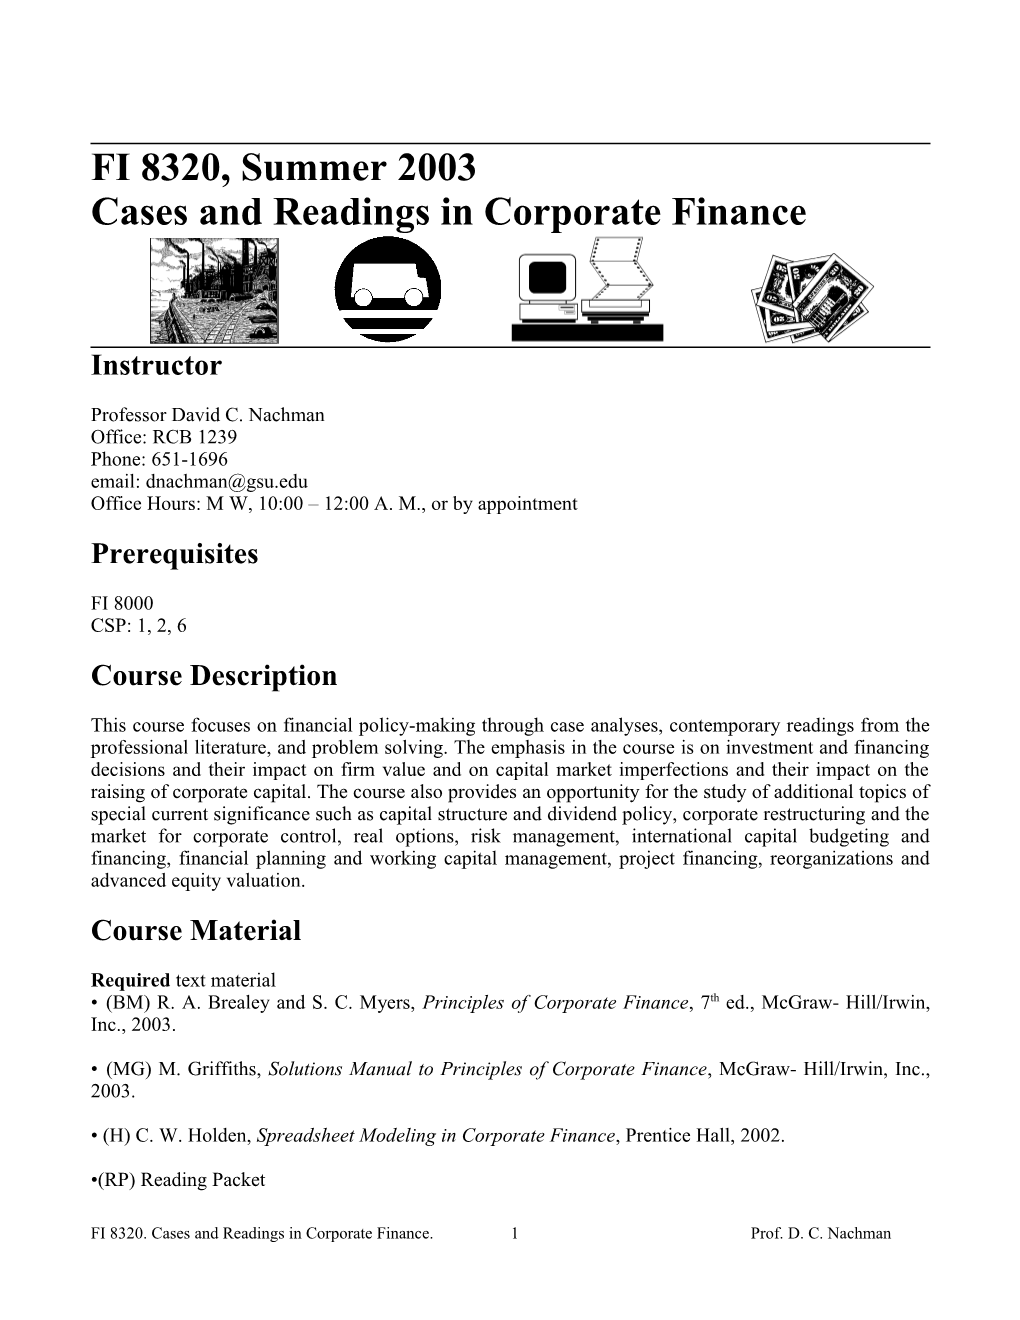 Cases and Readings in Corporate Finance